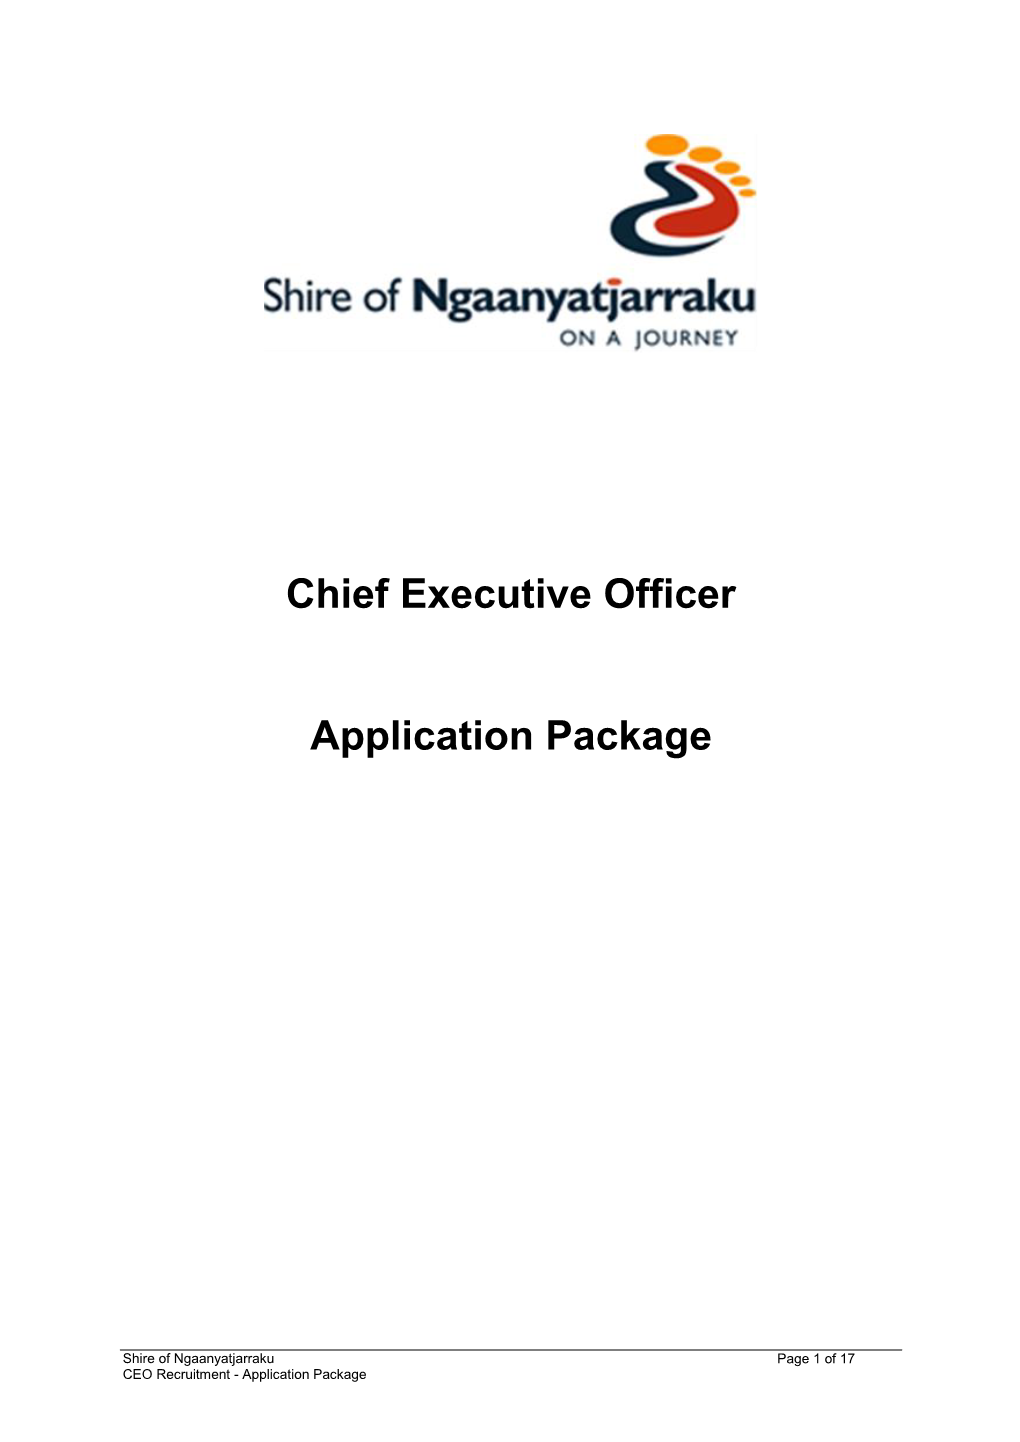 CEO Application Package.Docx